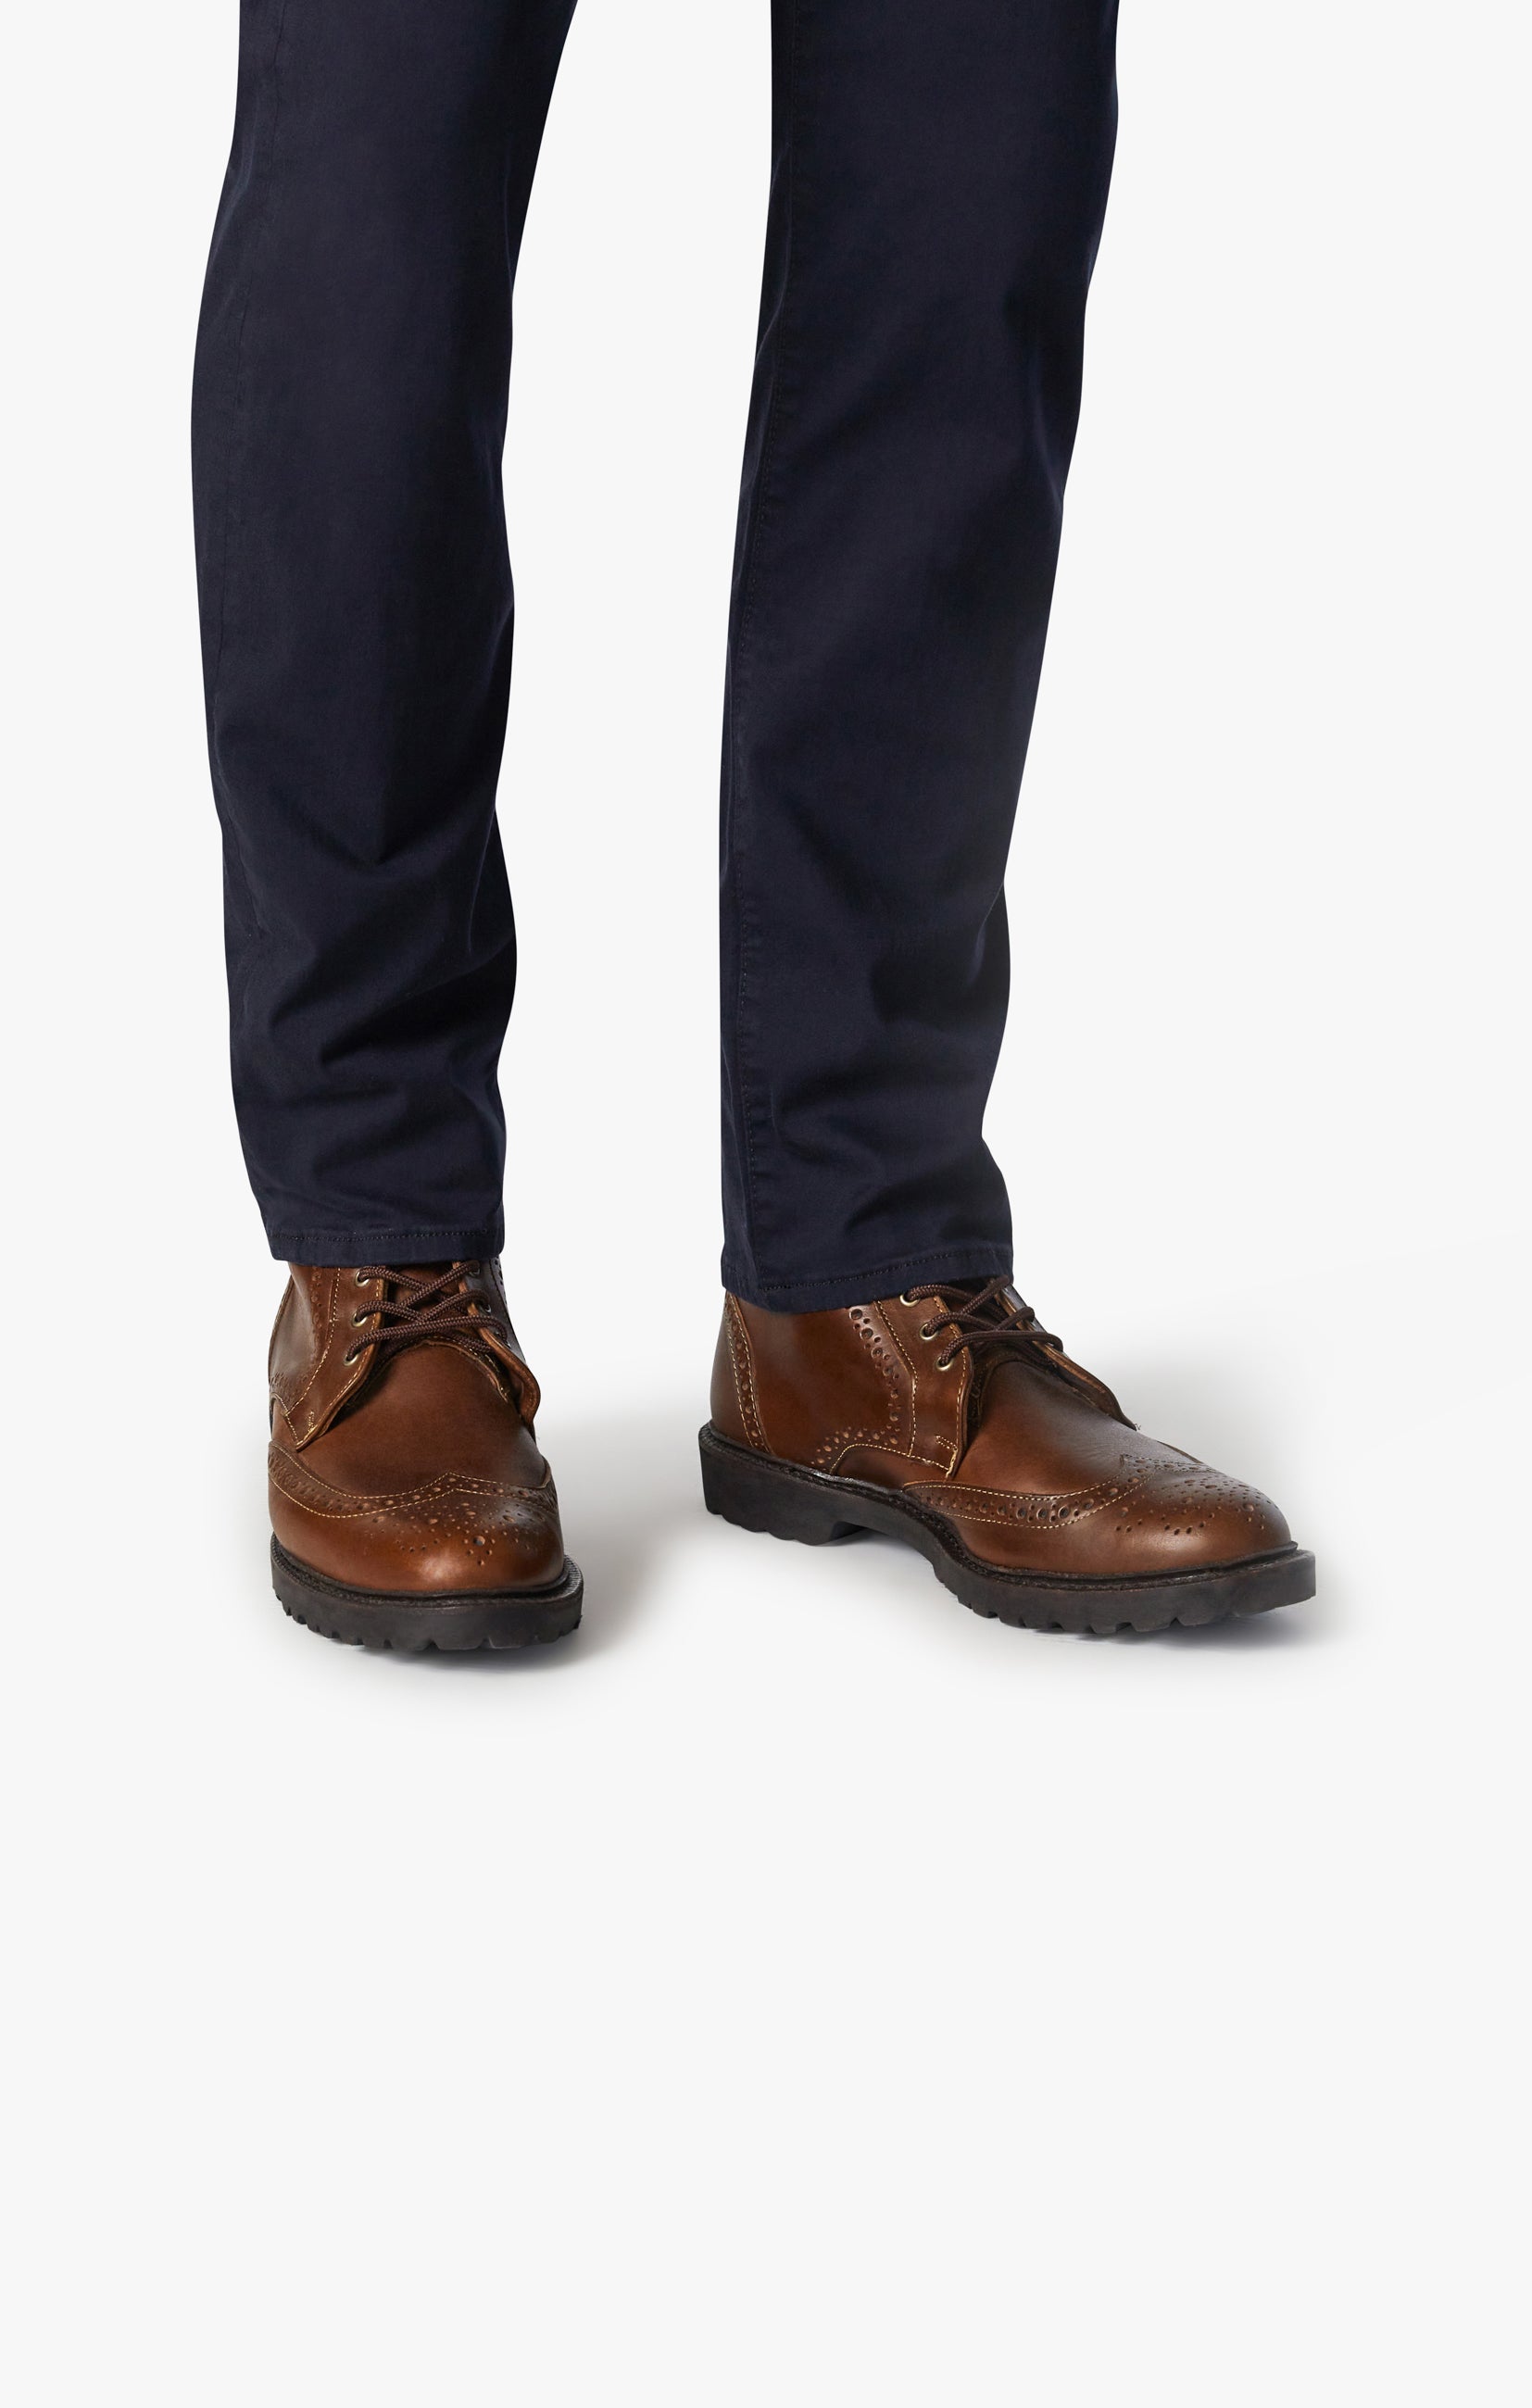 Courage Straight Leg Pants in Navy Twill Image 5